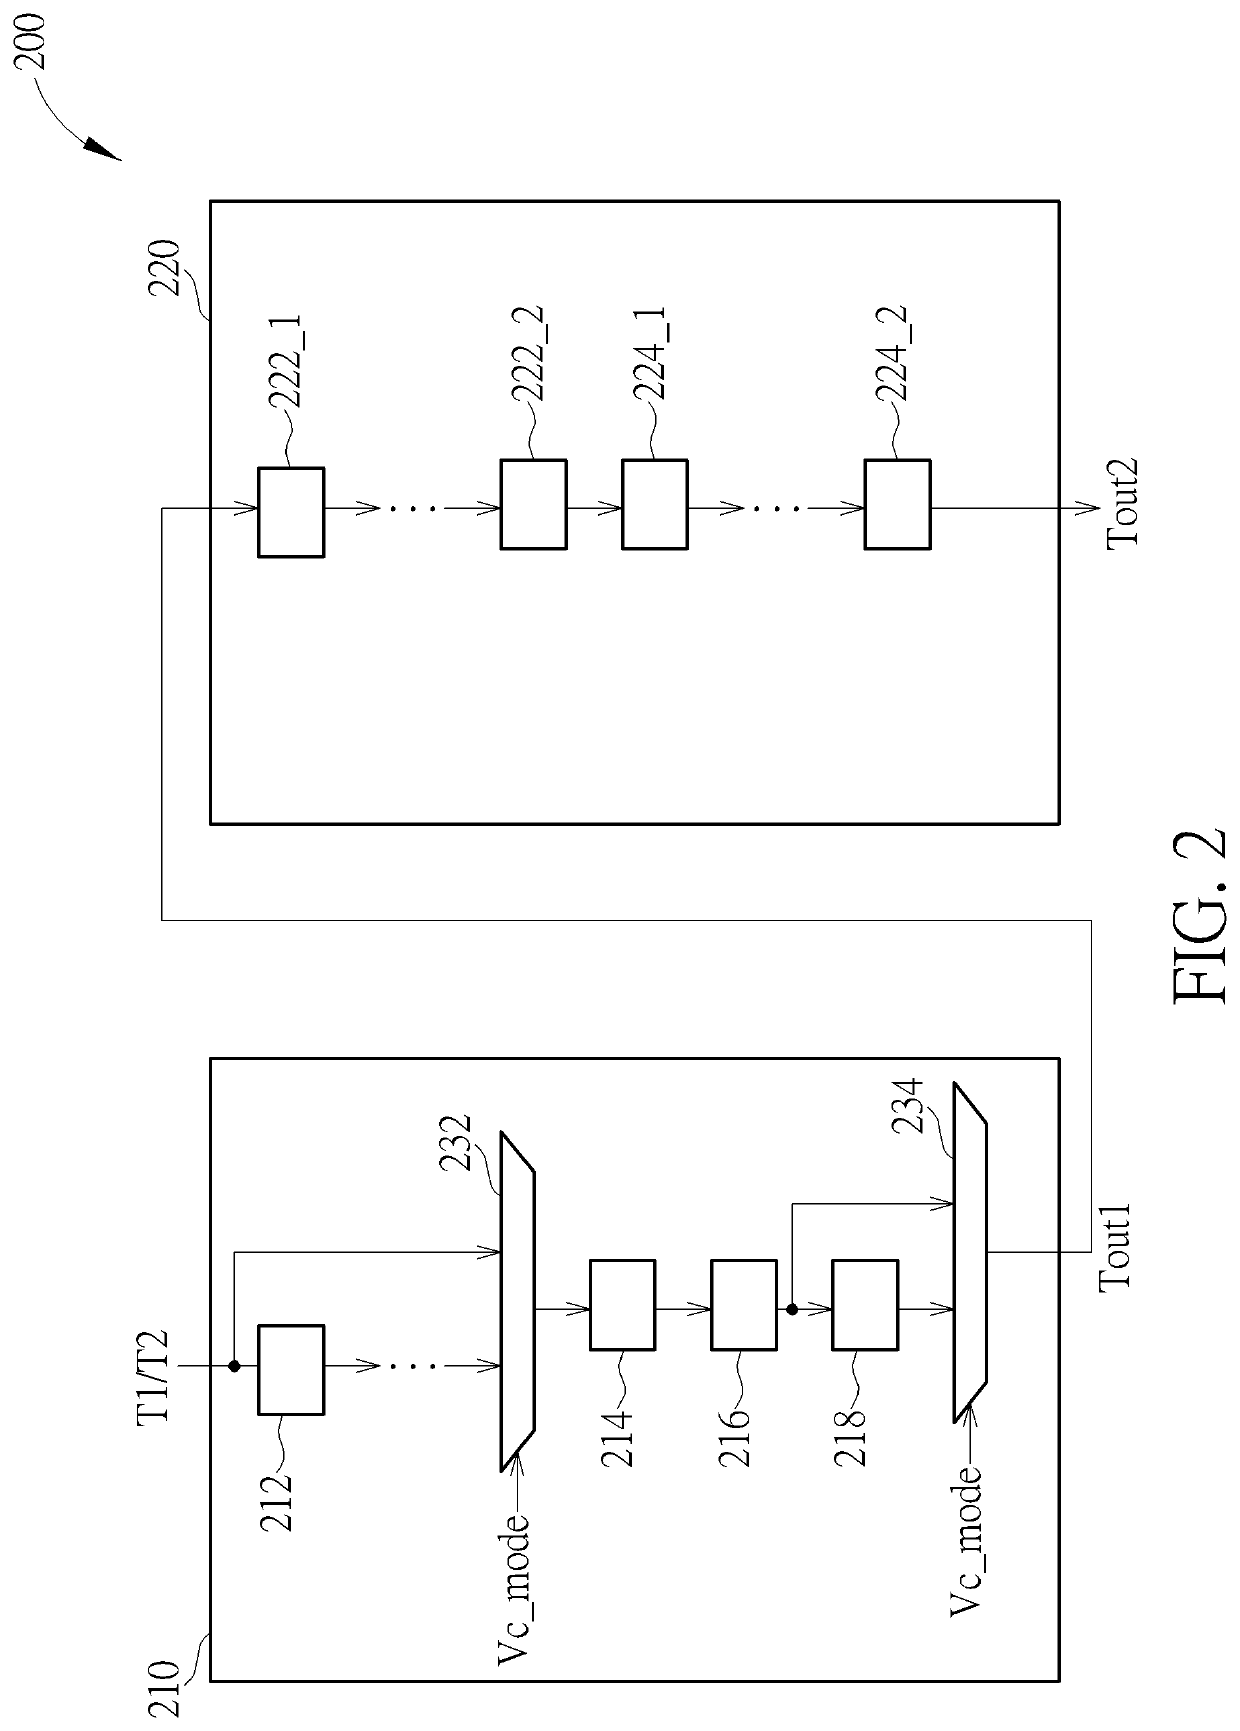 Circuit applied to multiple scan modes for testing